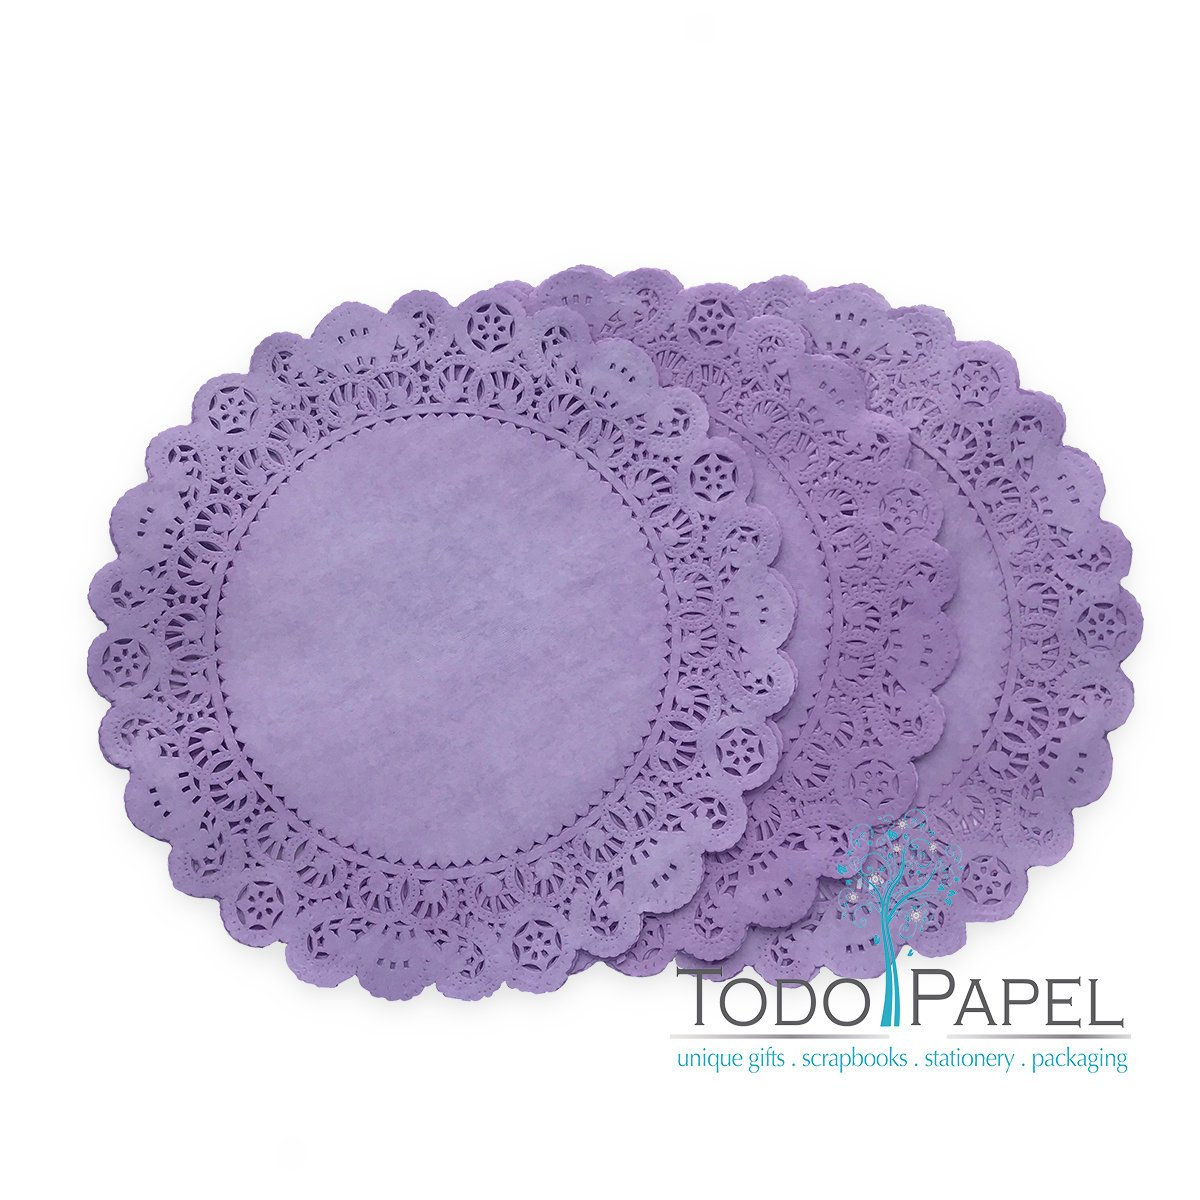 50 Pack Of 12 Inch Plum Purple Paper Lace Doilies | Individually Hand Dyed | Perfect Wedding And Party Table Decor As Chargers, Placemat,